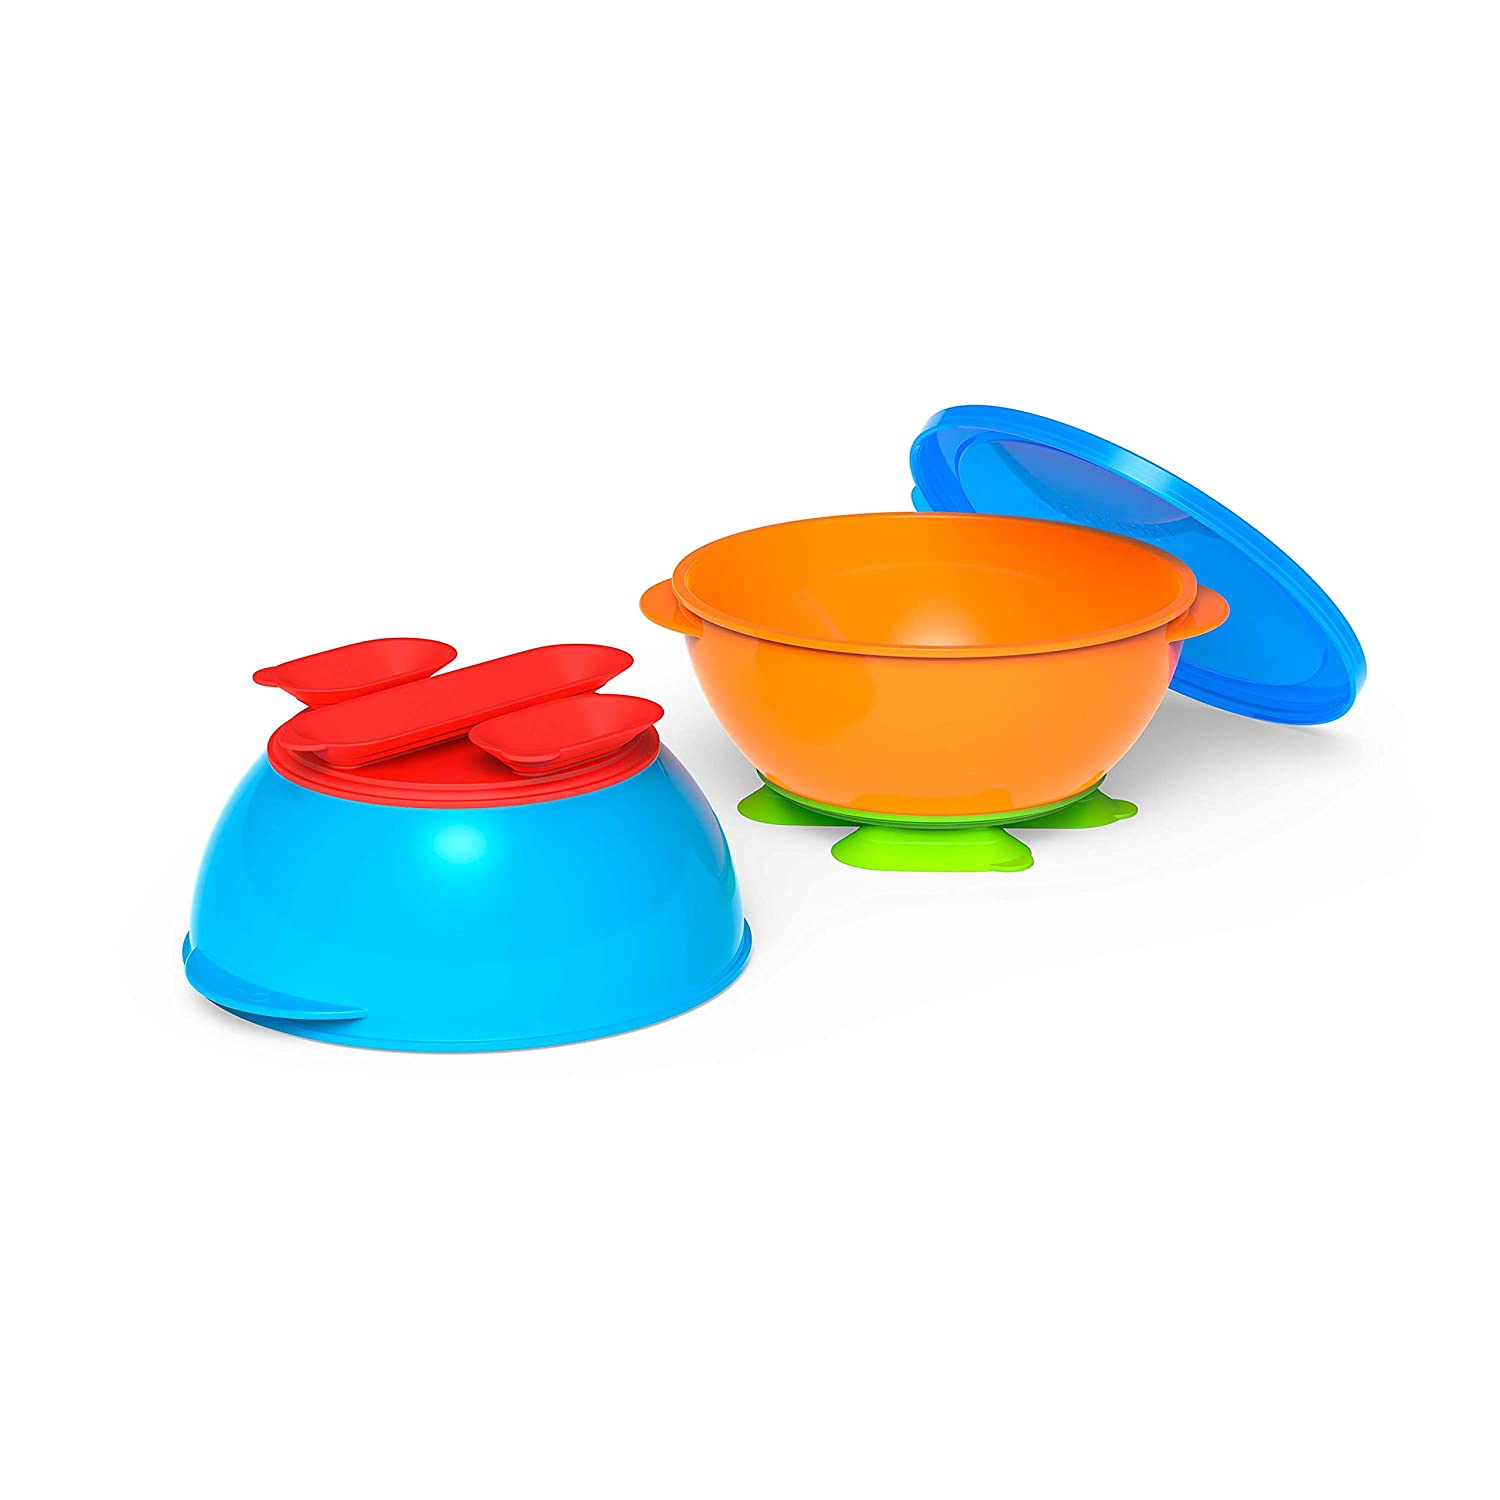 NUK First Essentials Toddler Tri-Suction Bowls, 2-Pack